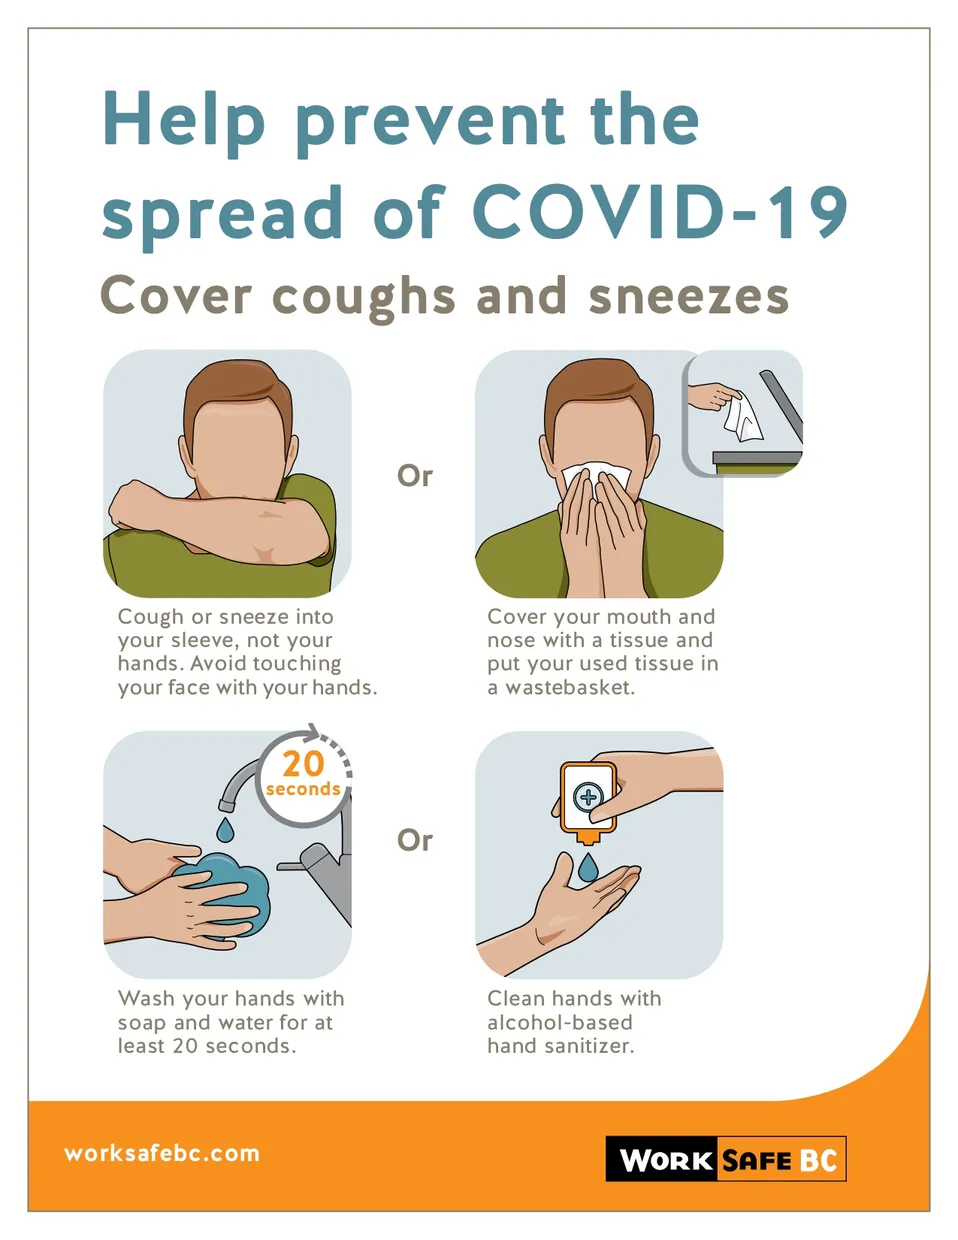 How to prevent the spread of COVID 